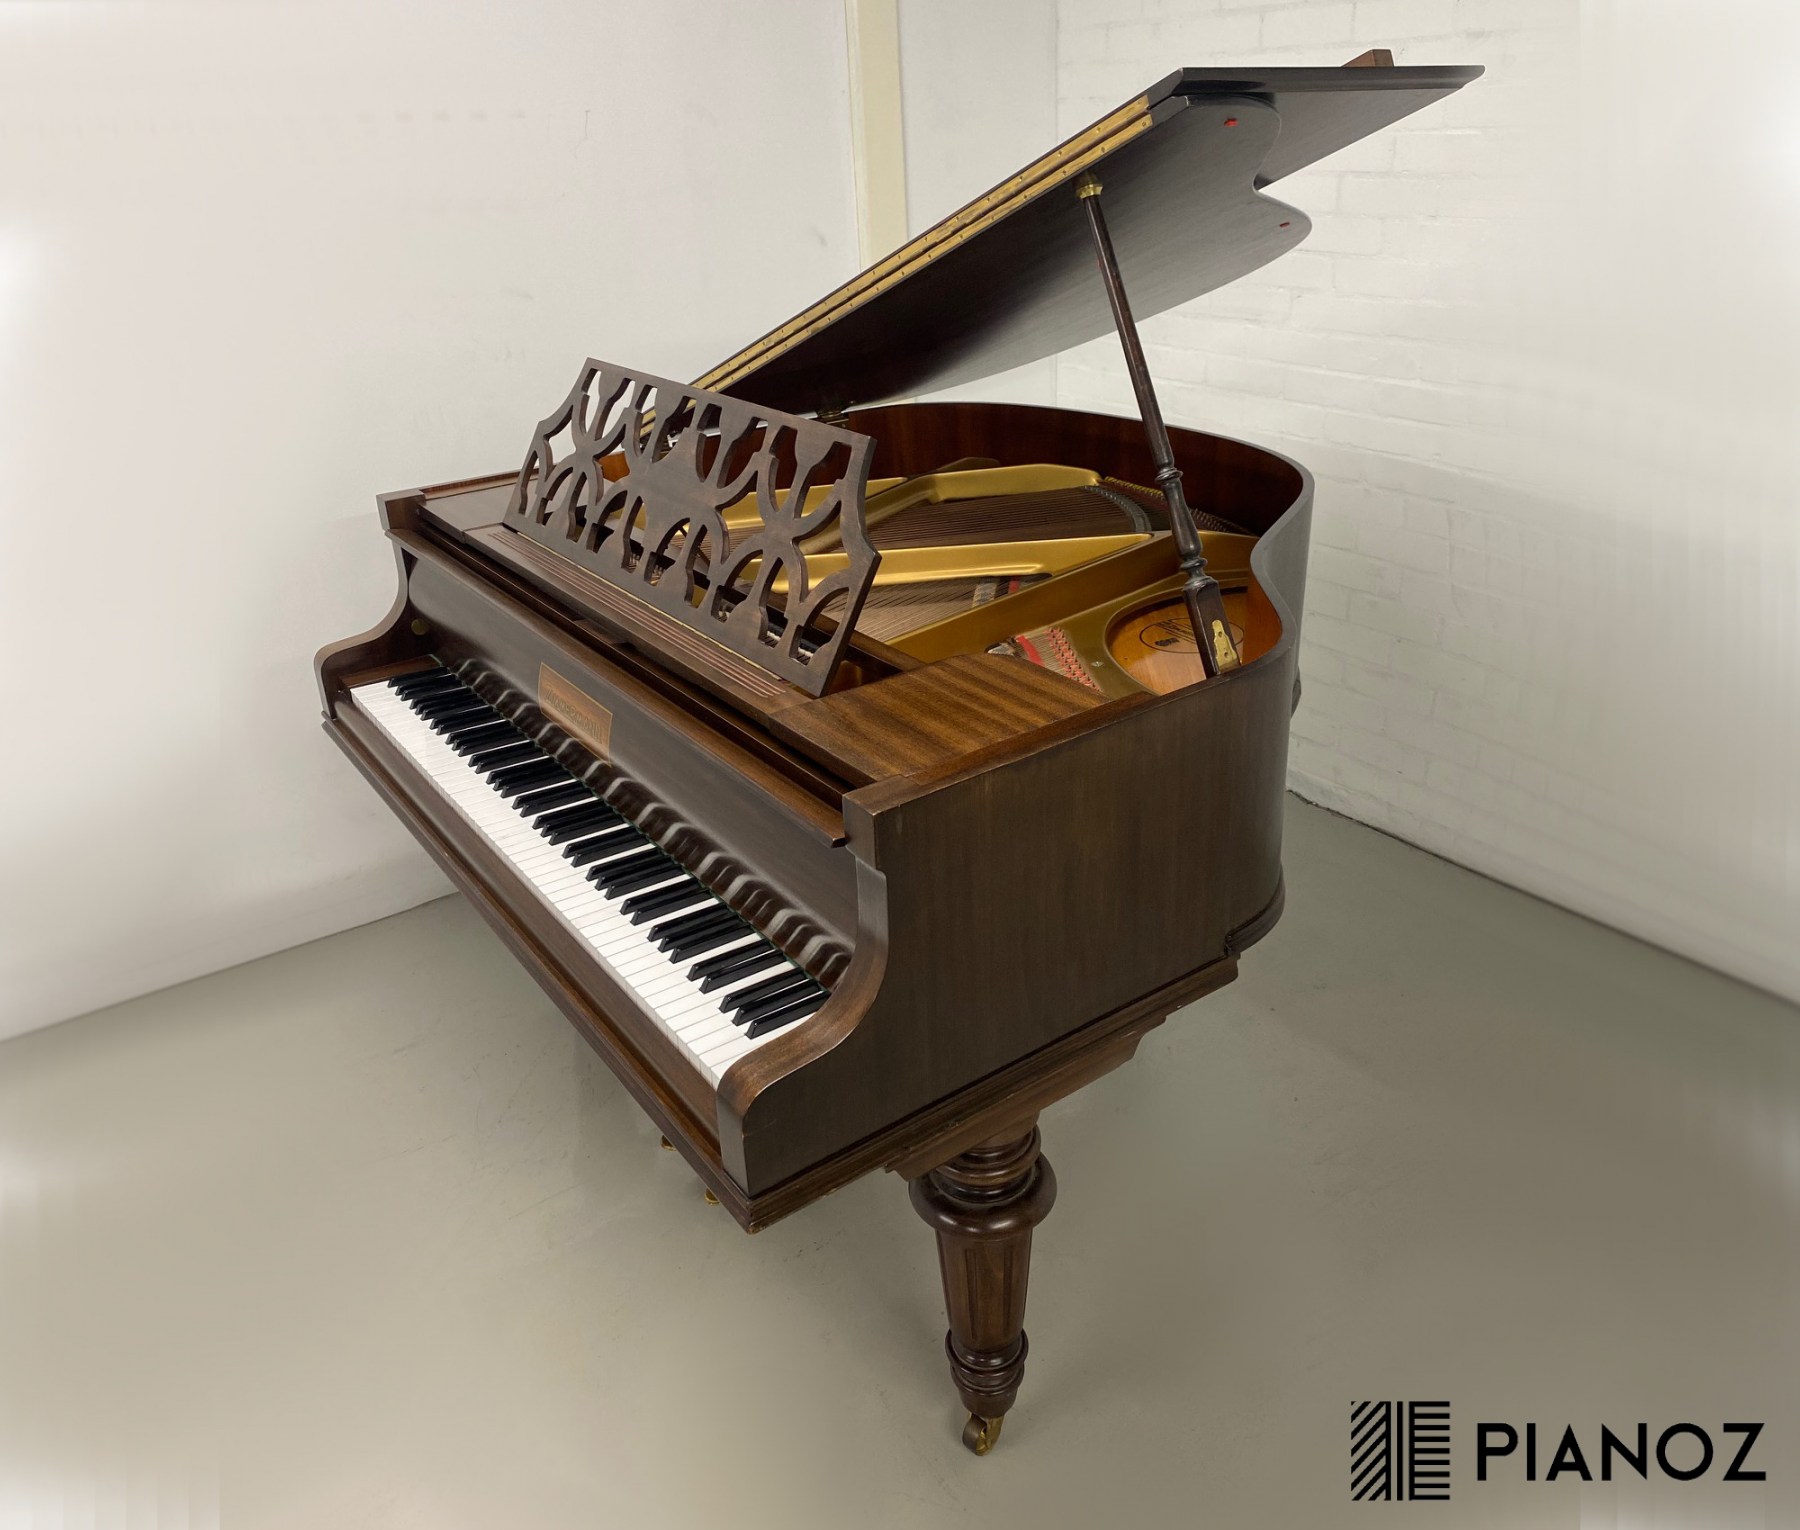 Zimmermann Antique Style Baby Grand Piano piano for sale in UK